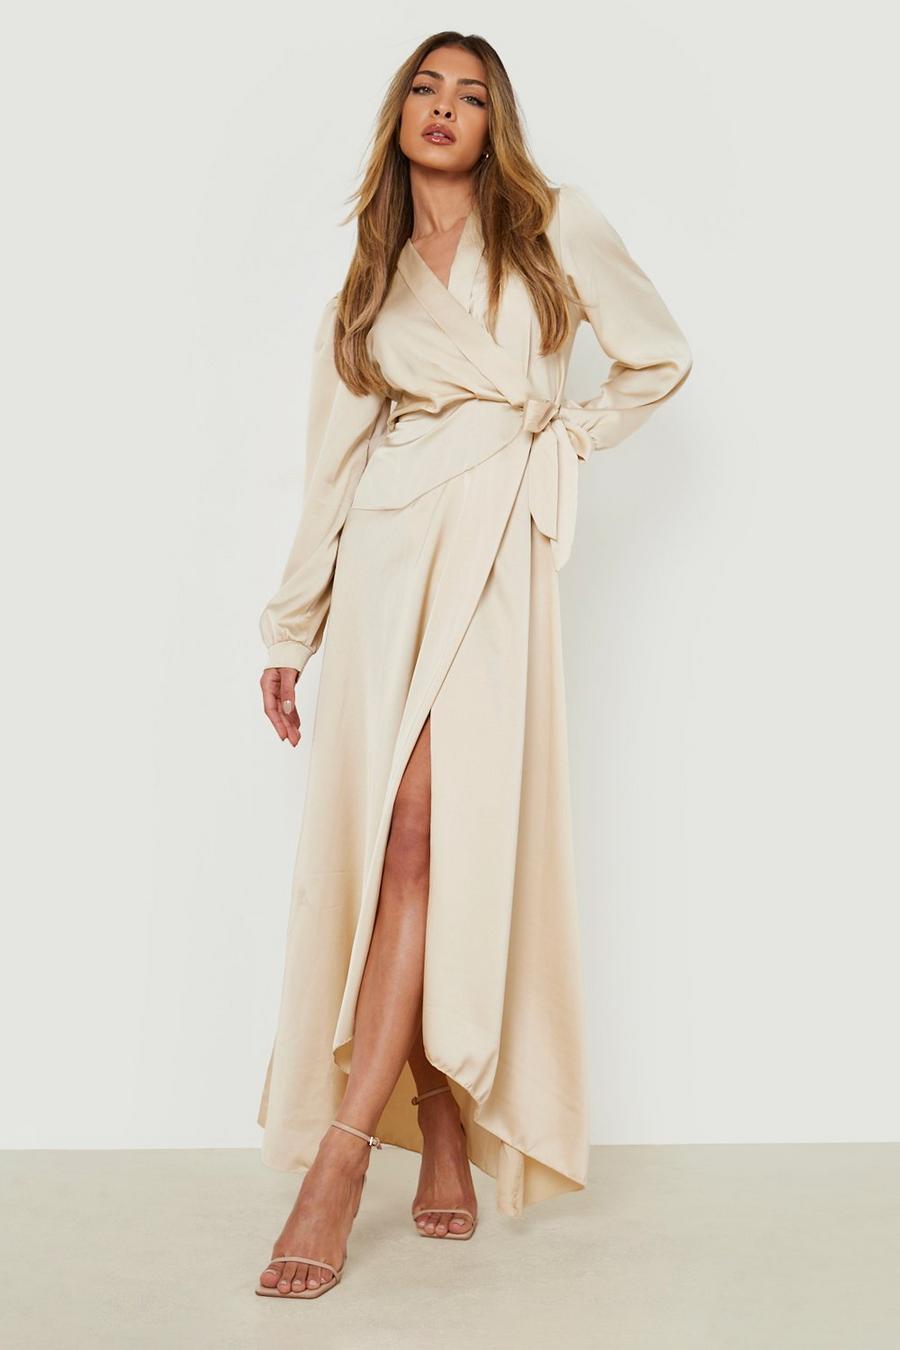 Champagne beige Satin Wrap Belted Maxi Dress